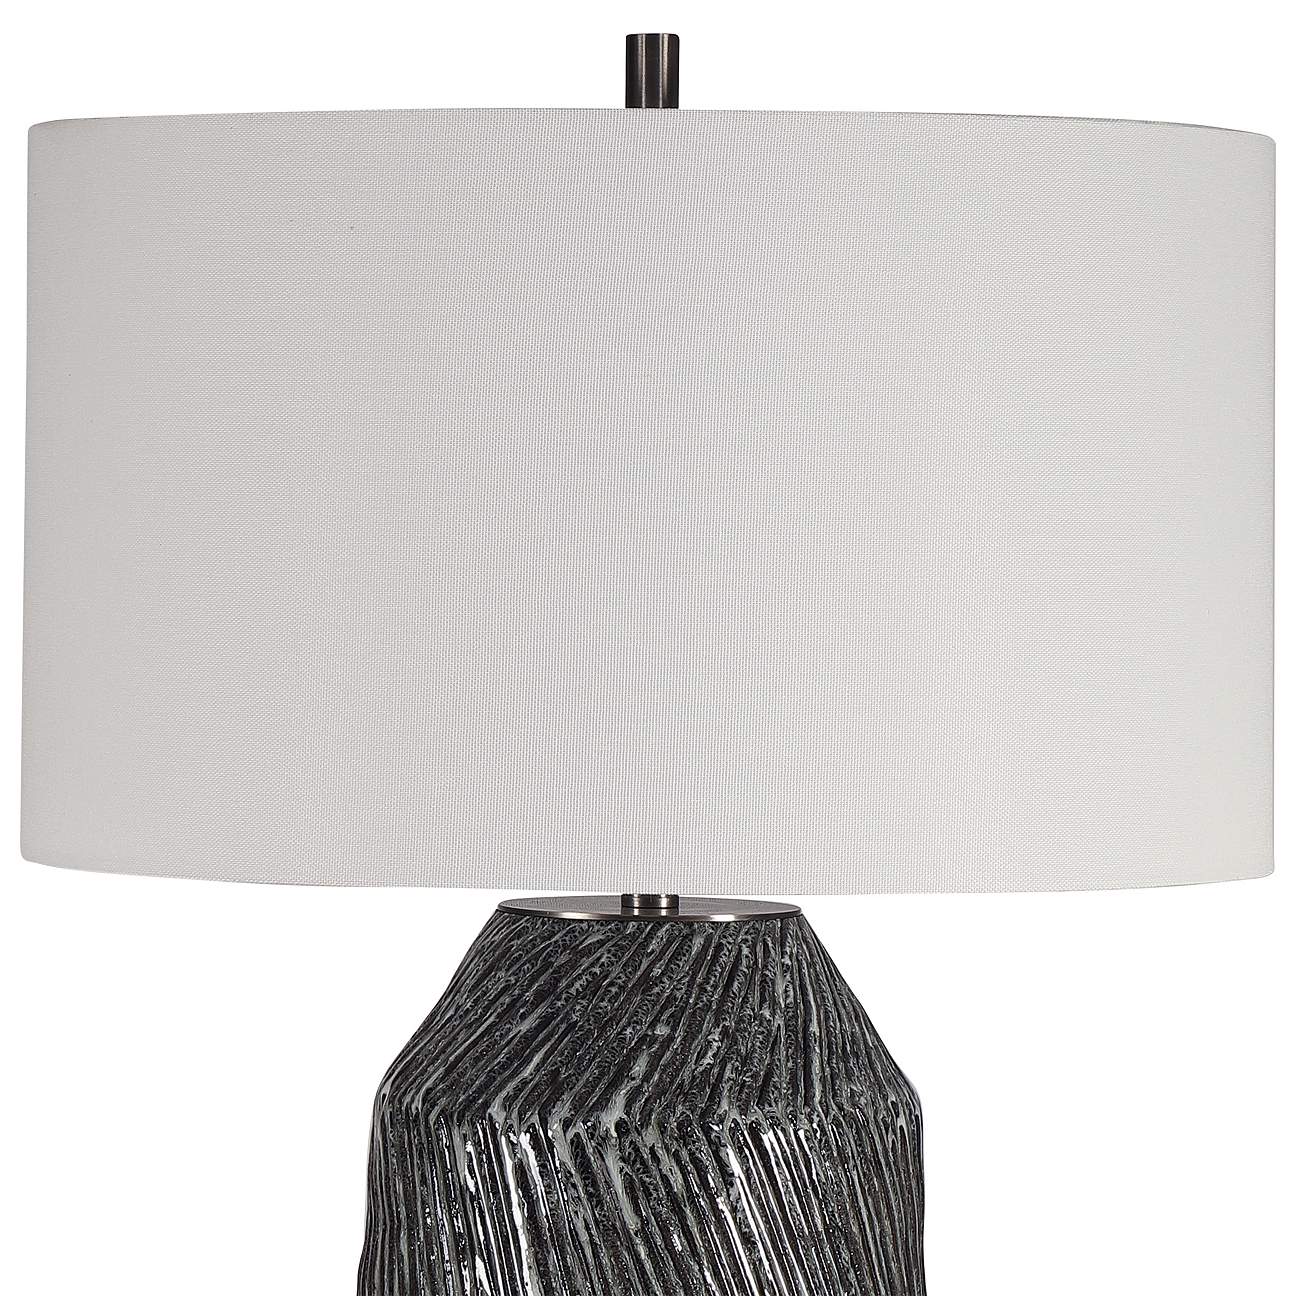 Uttermost Malaya Black and White Ceramic Table Lamp - #87N18 | Lamps Plus